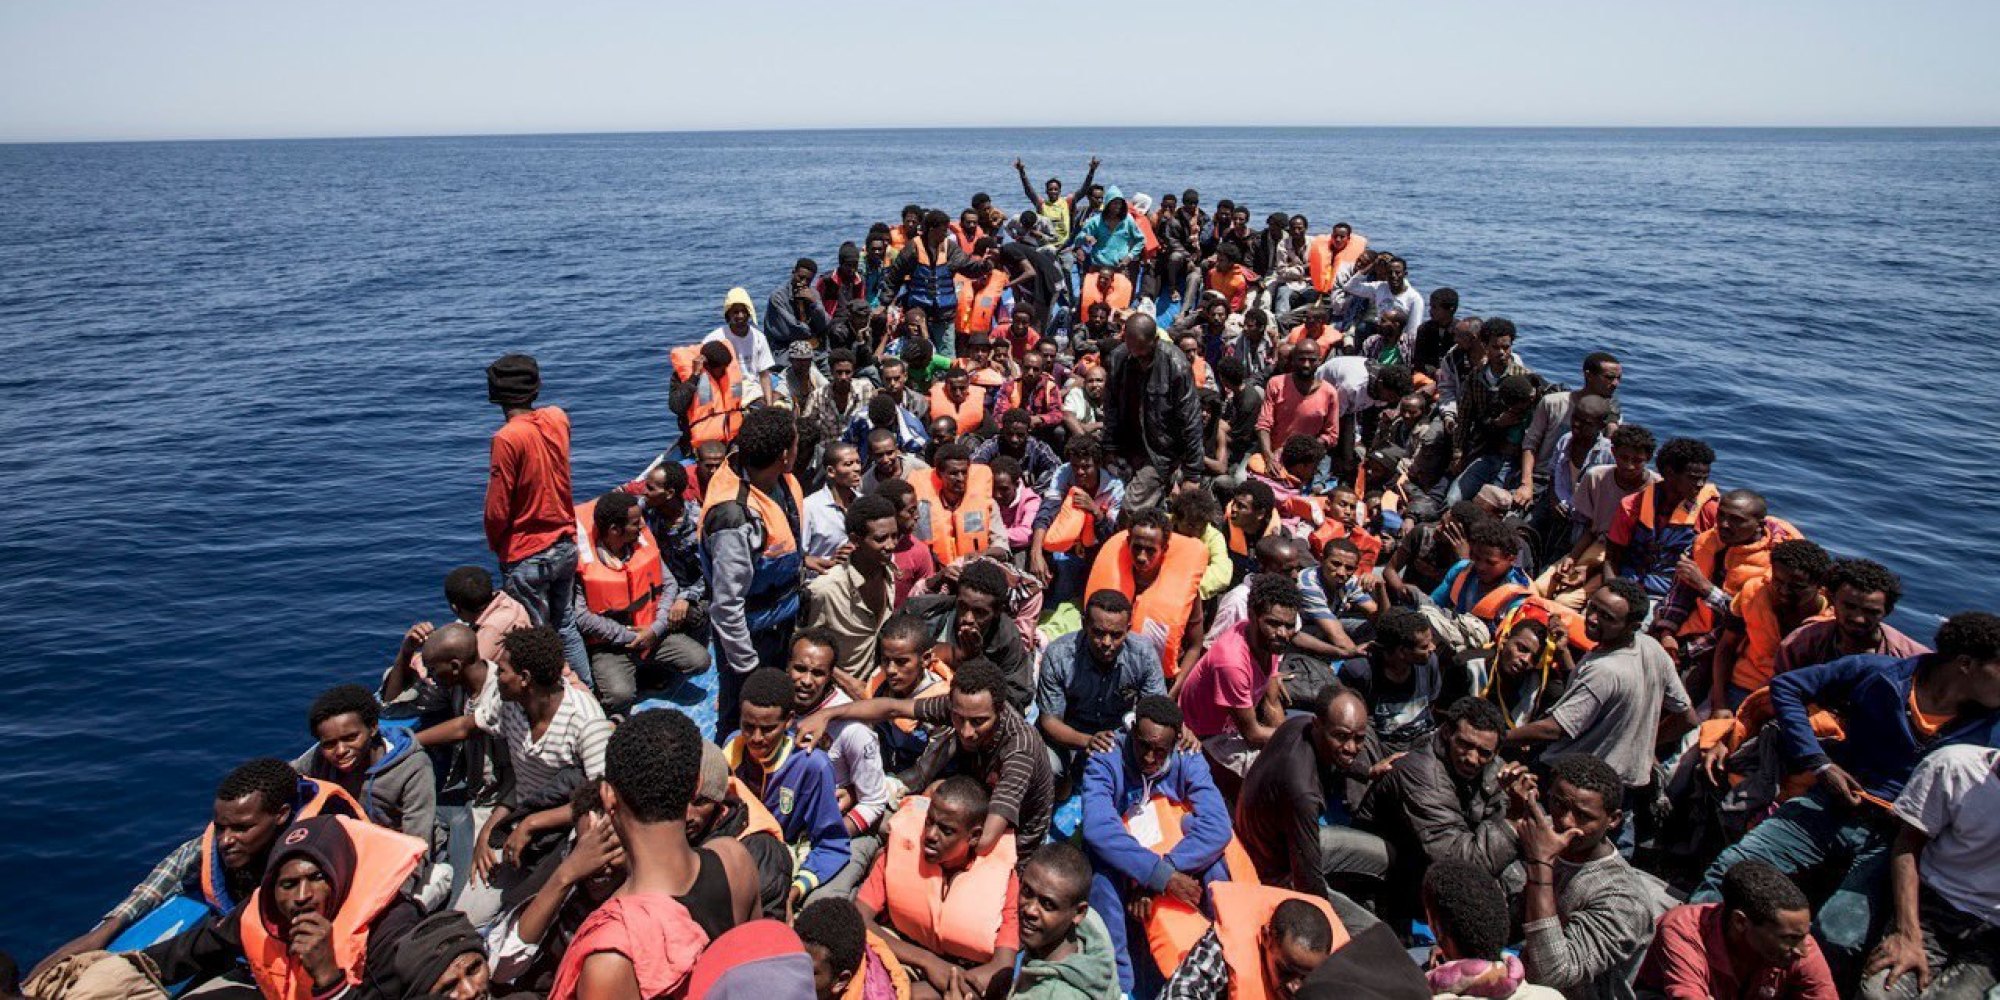 Migrants crowd the deck of their wooden boat off the coast of Libya May 14, 2015.  International non-governmental organisations Medecins sans Frontieres (MSF) and MOAS (Migrant Offshore Aid Station) rescued 561 migrants at sea off the coast of Libya on Thursday, according to Maltese media. Their vessel, the Phoenix, is the first privately funded vessel to operate in the Mediterranean. Almost 3,600 migrants have been rescued from overcrowded boats sailing from Africa to Europe over the past 48 hours, Italy said on Thursday, with sea conditions seen as perfect for attempting the crossing. REUTERS/MOAS/Jason Florio/Handout via Reuters

ATTENTION EDITORS - NO SALES. NO ARCHIVES. FOR EDITORIAL USE ONLY. NOT FOR SALE FOR MARKETING OR ADVERTISING CAMPAIGNS. THIS IMAGE HAS BEEN SUPPLIED BY A THIRD PARTY. IT IS DISTRIBUTED, EXACTLY AS RECEIVED BY REUTERS, AS A SERVICE TO CLIENTS

      TPX IMAGES OF THE DAY